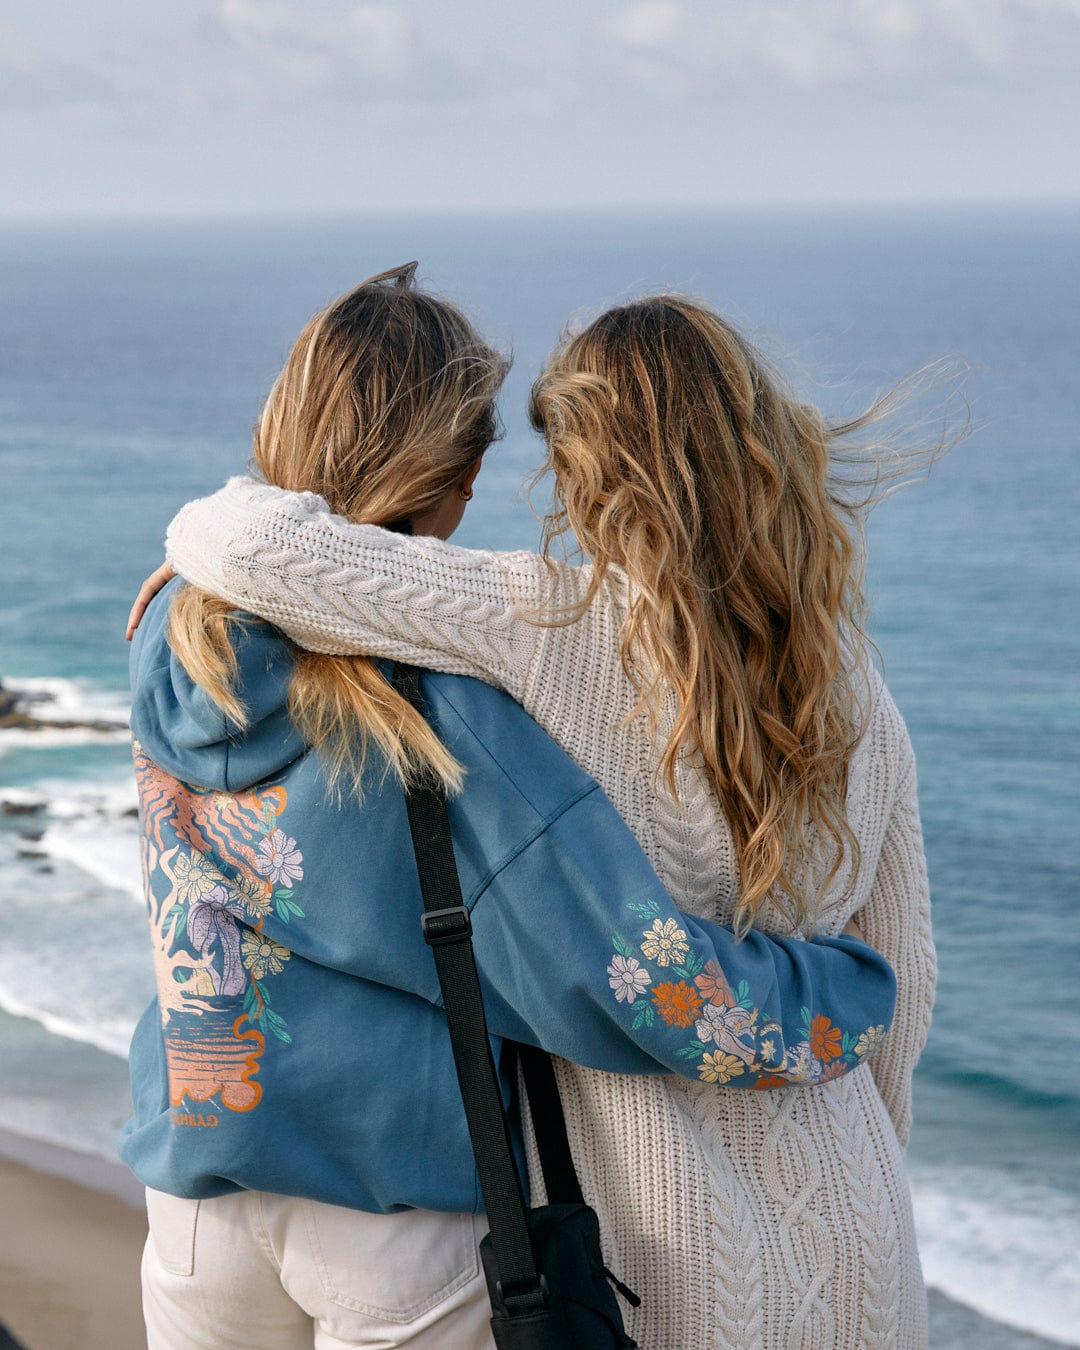 Two women are standing close to each other, overlooking a sea view, with Luna's arm around the other's shoulder. Both are wearing Saltrock sweaters and have wavy blonde hair.